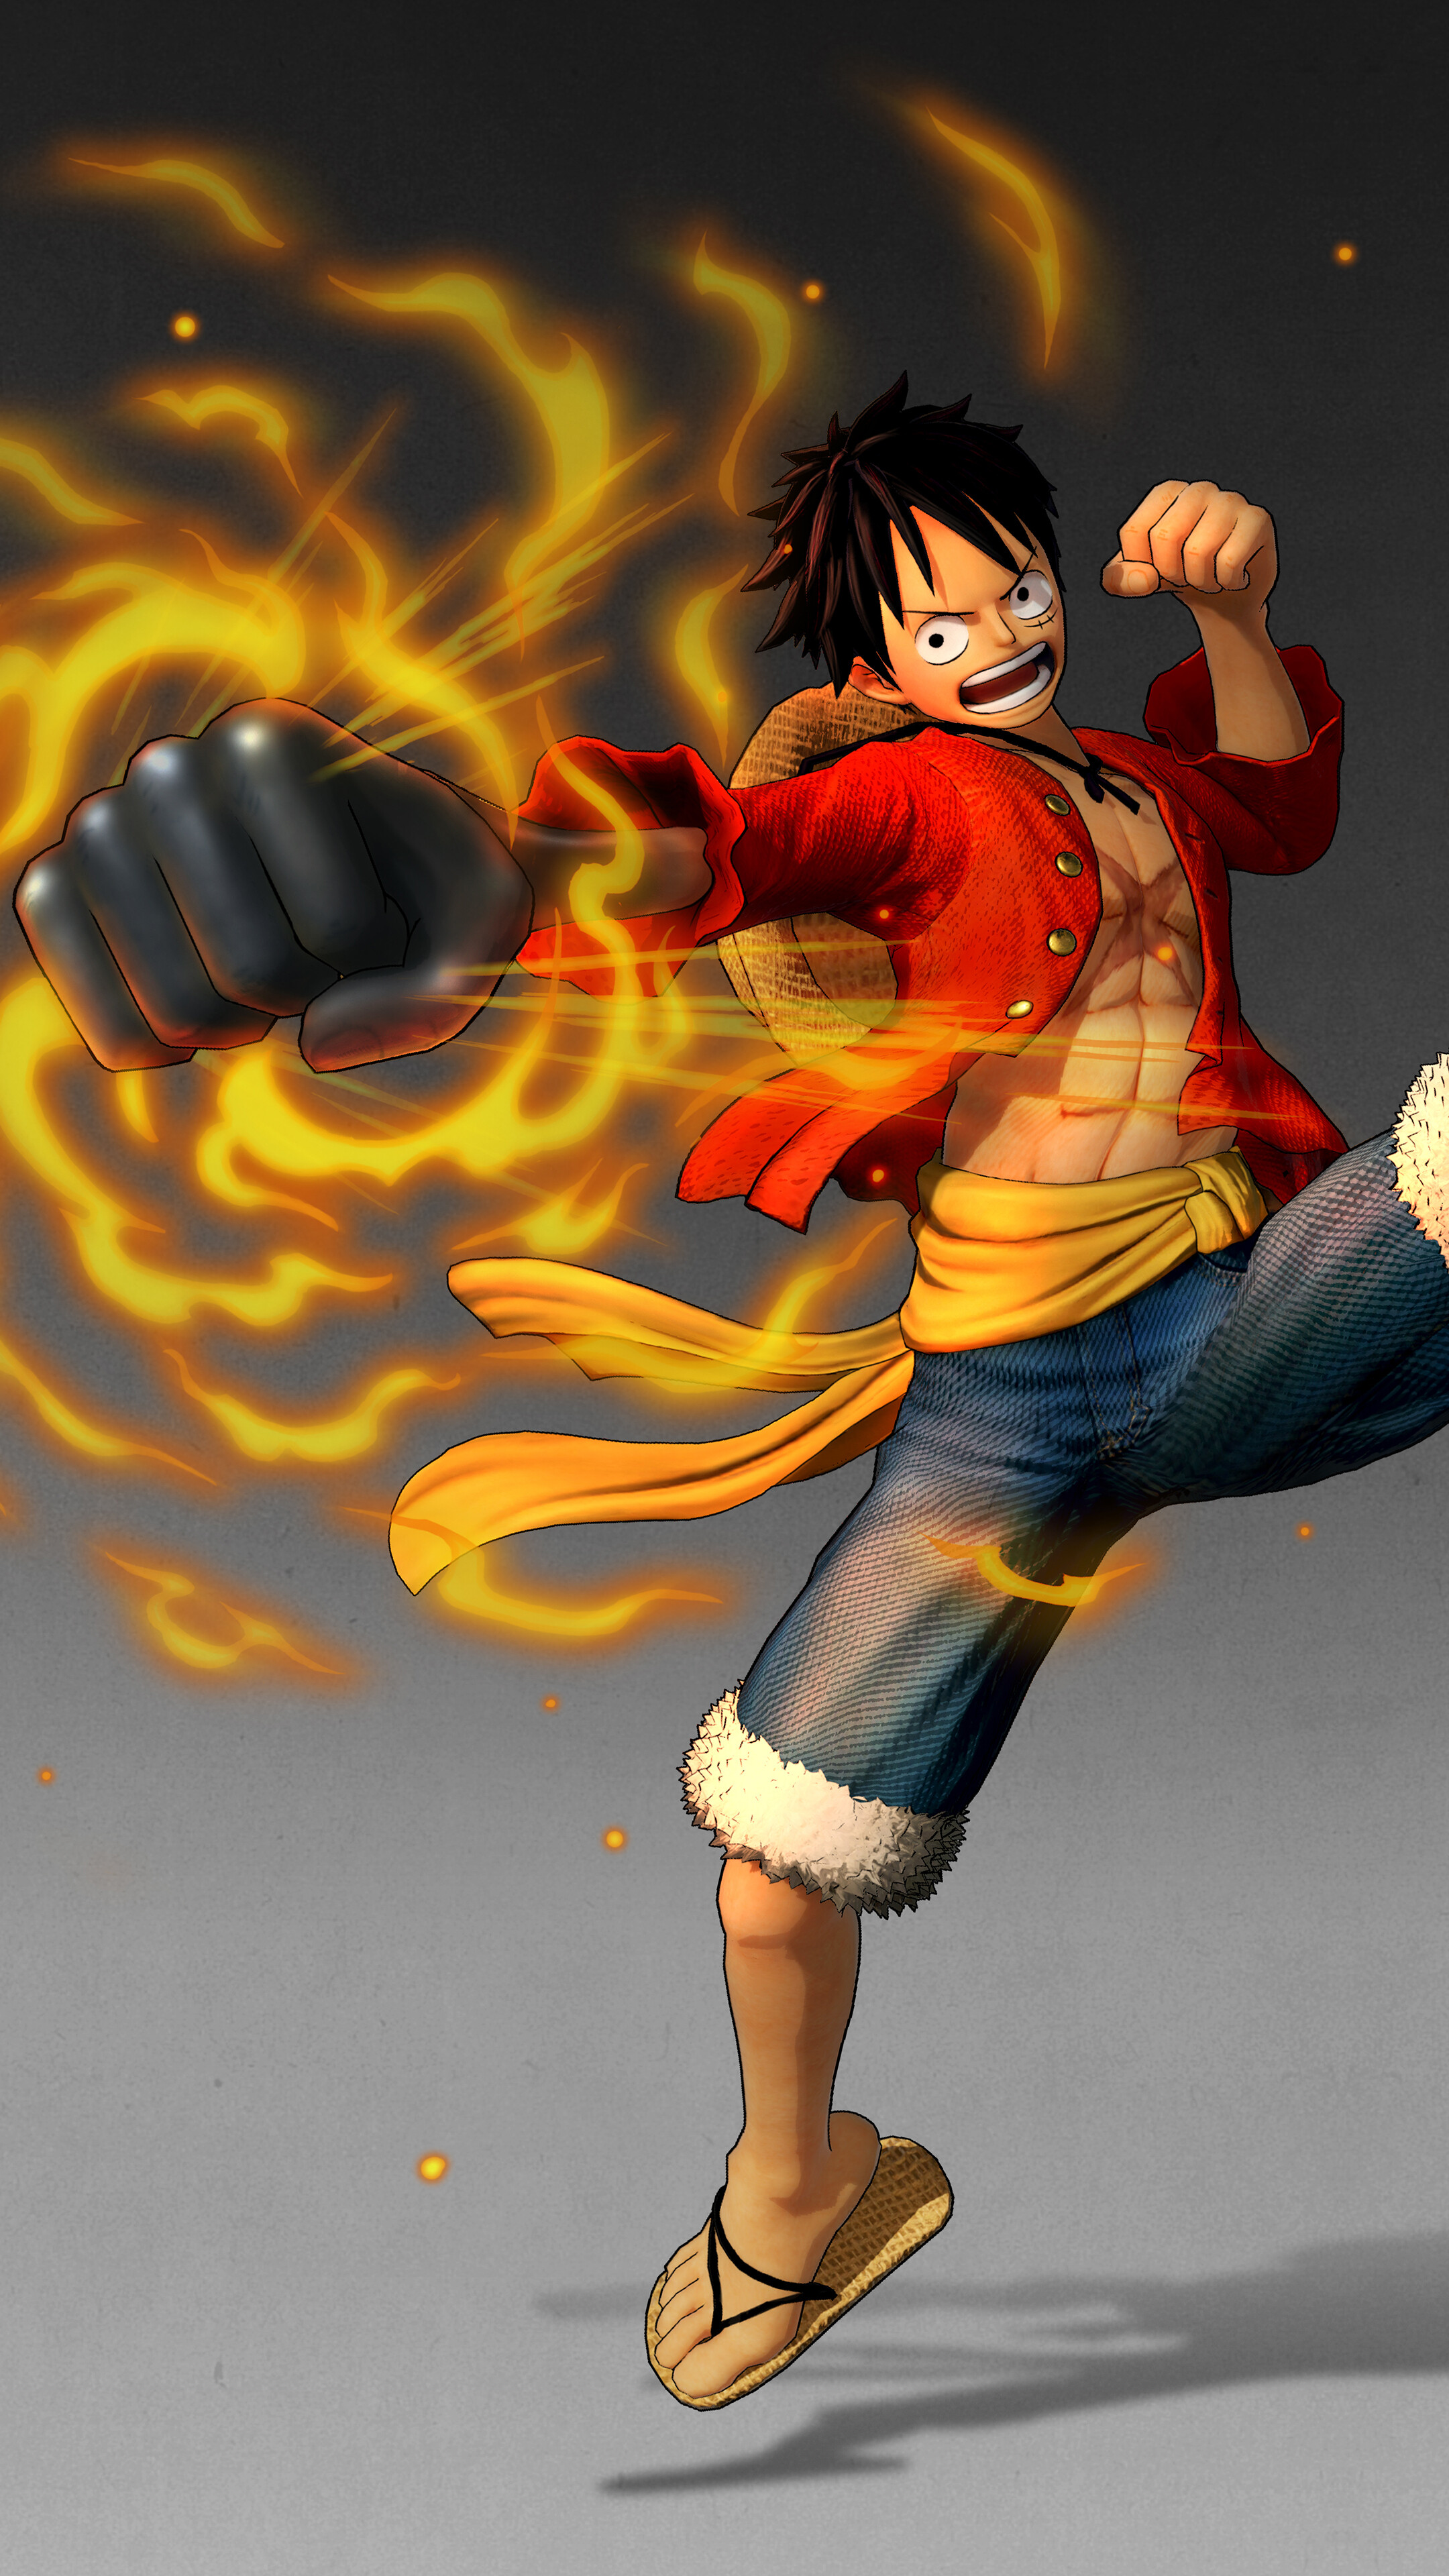 Luffy, Red Hawk, One Piece Pirate Warriors 4 phone HD Wallpaper, Image, Background, Photo and Picture HD Wallpaper